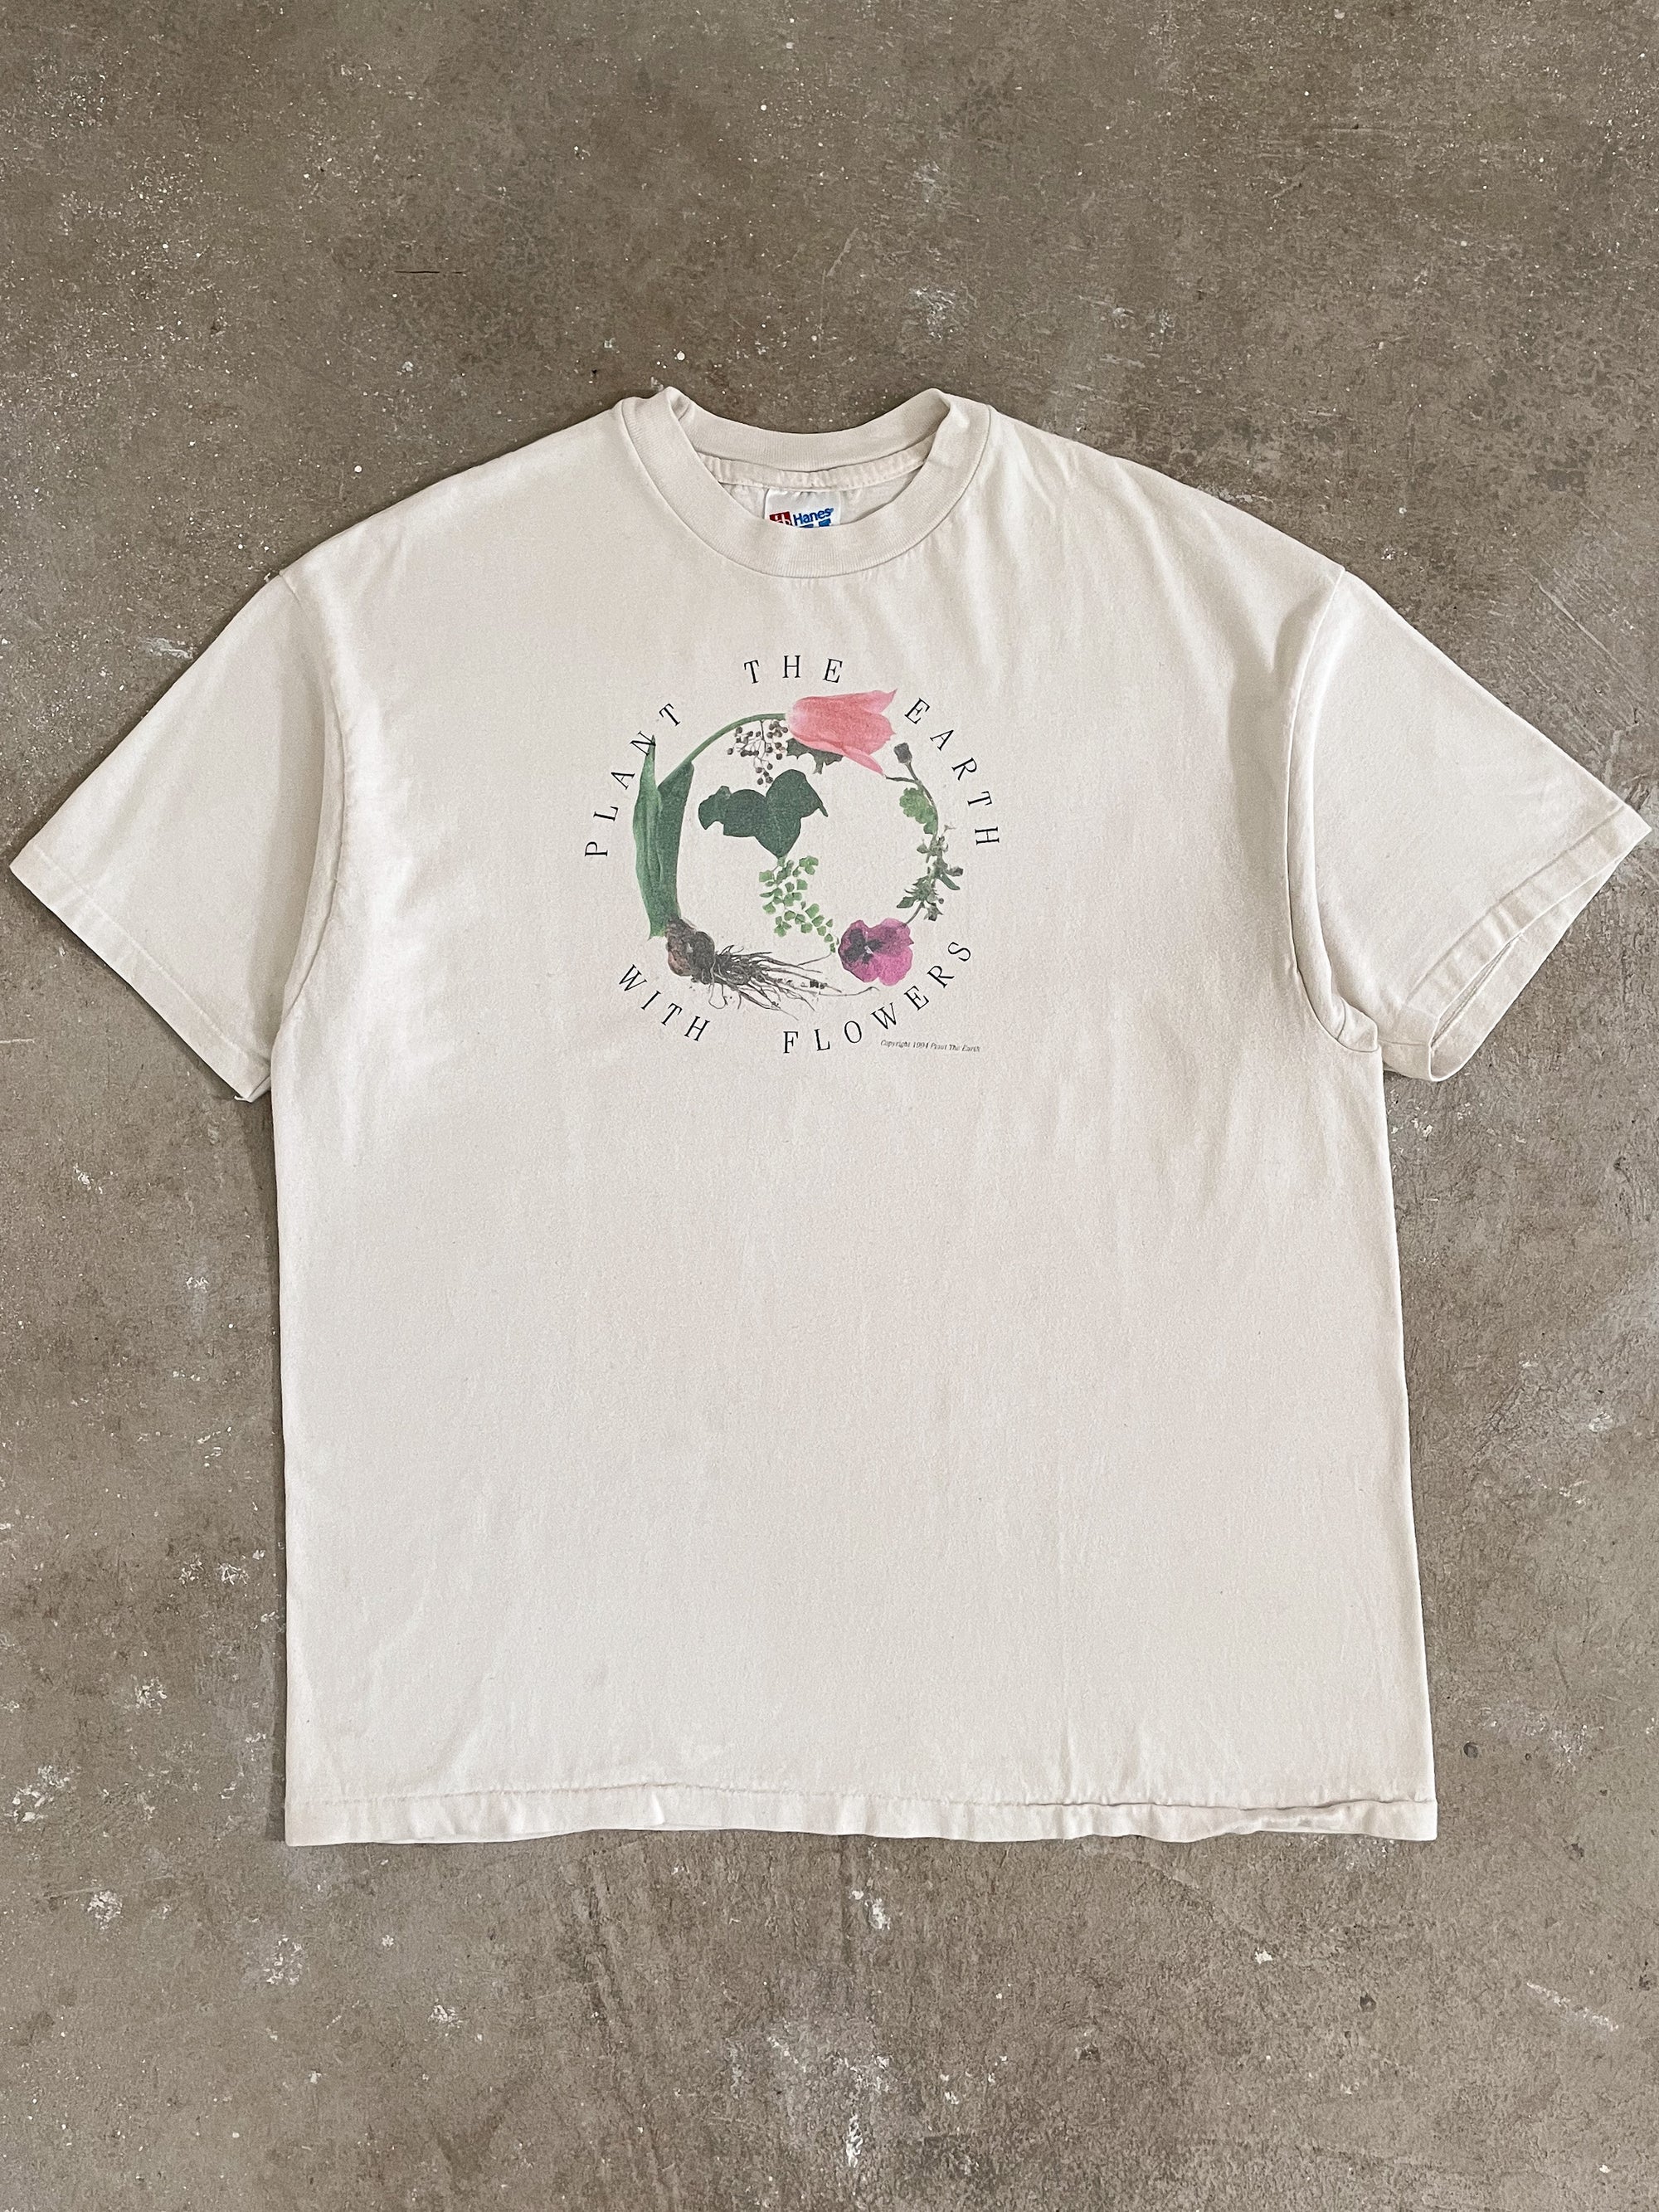 1990s “Plant The Earth With Flowers” Tee (XL)